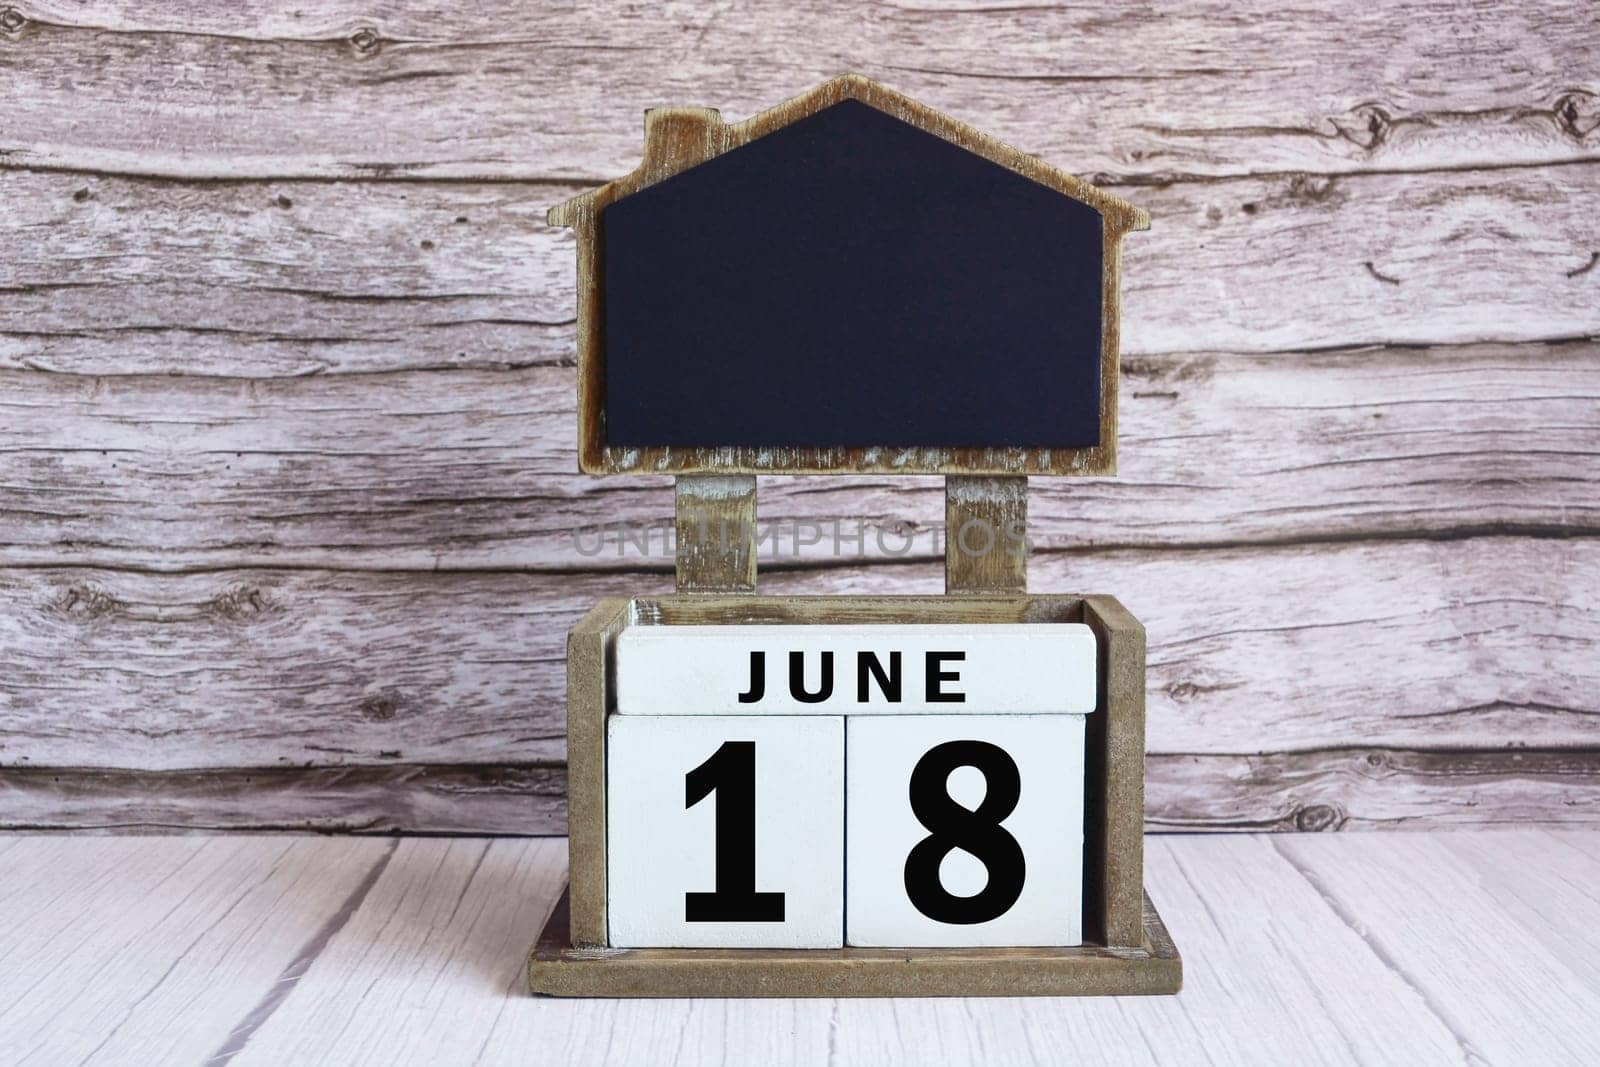 Chalkboard with June 18 calendar date on white cube block on wooden table.